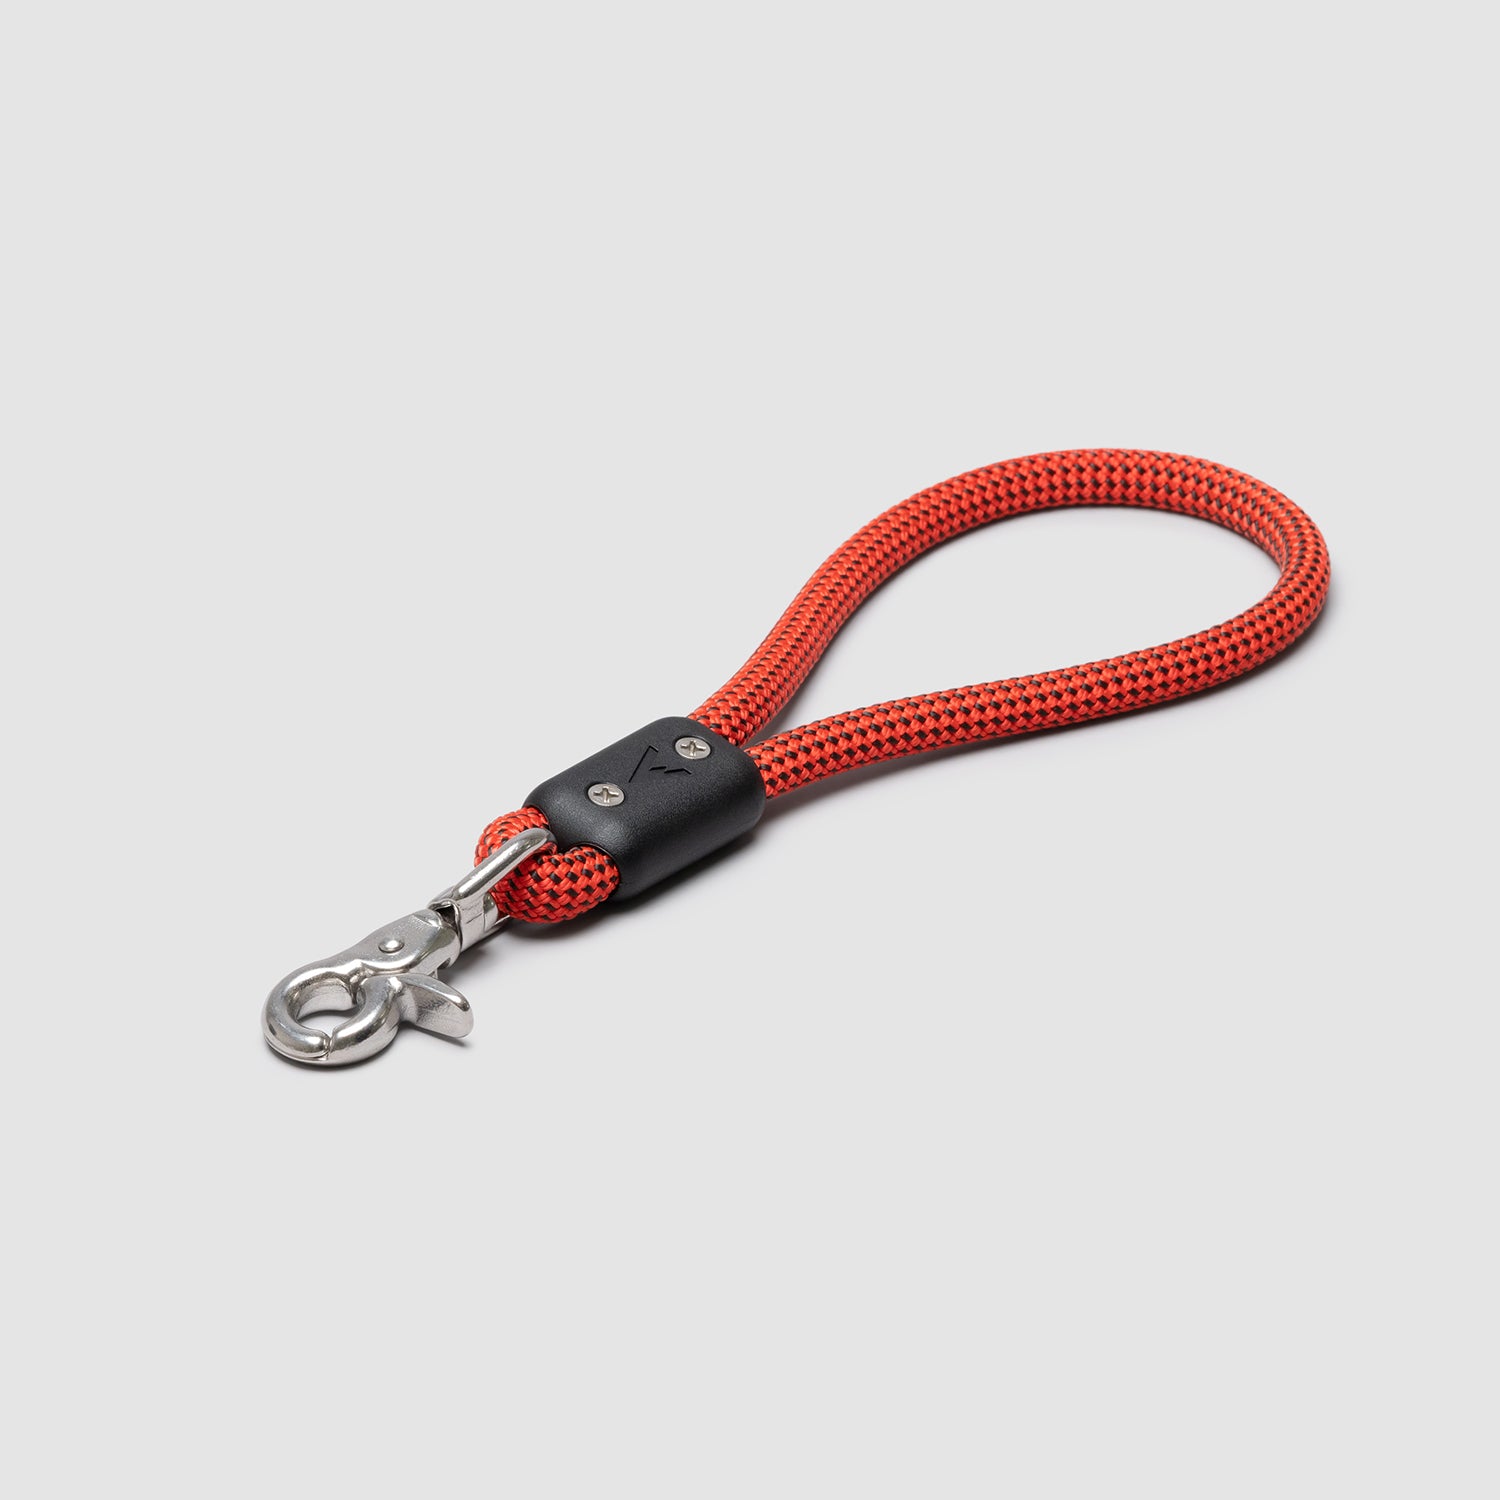 atlas pet company lifetime handle climbing rope lifetime warranty trail handle for active dogs --ruby